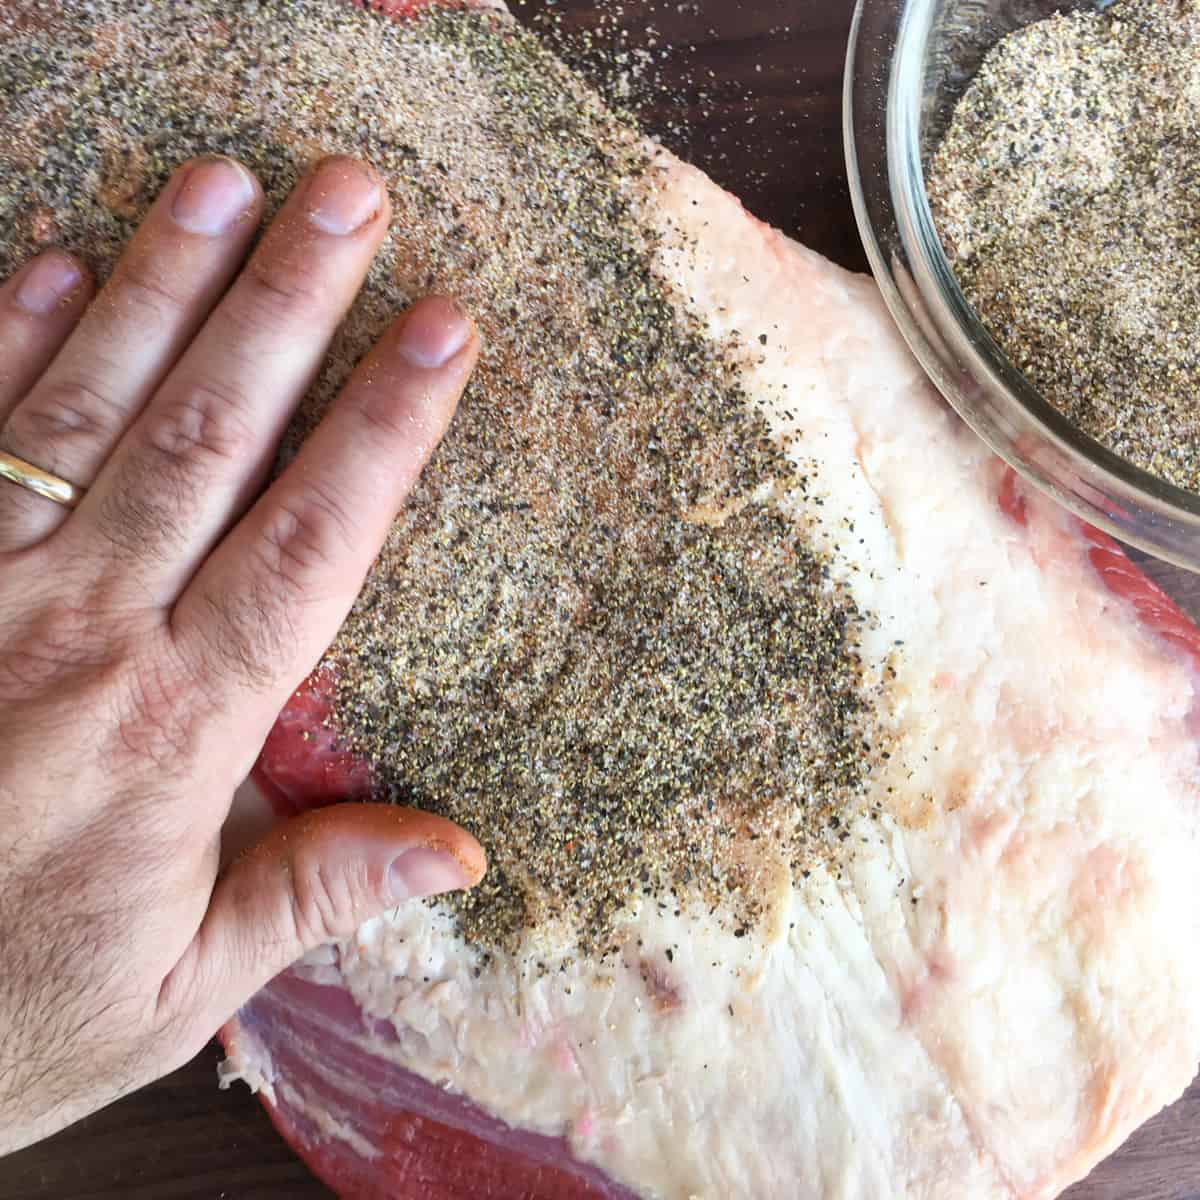 Rubbing some spices on a piece of beef.